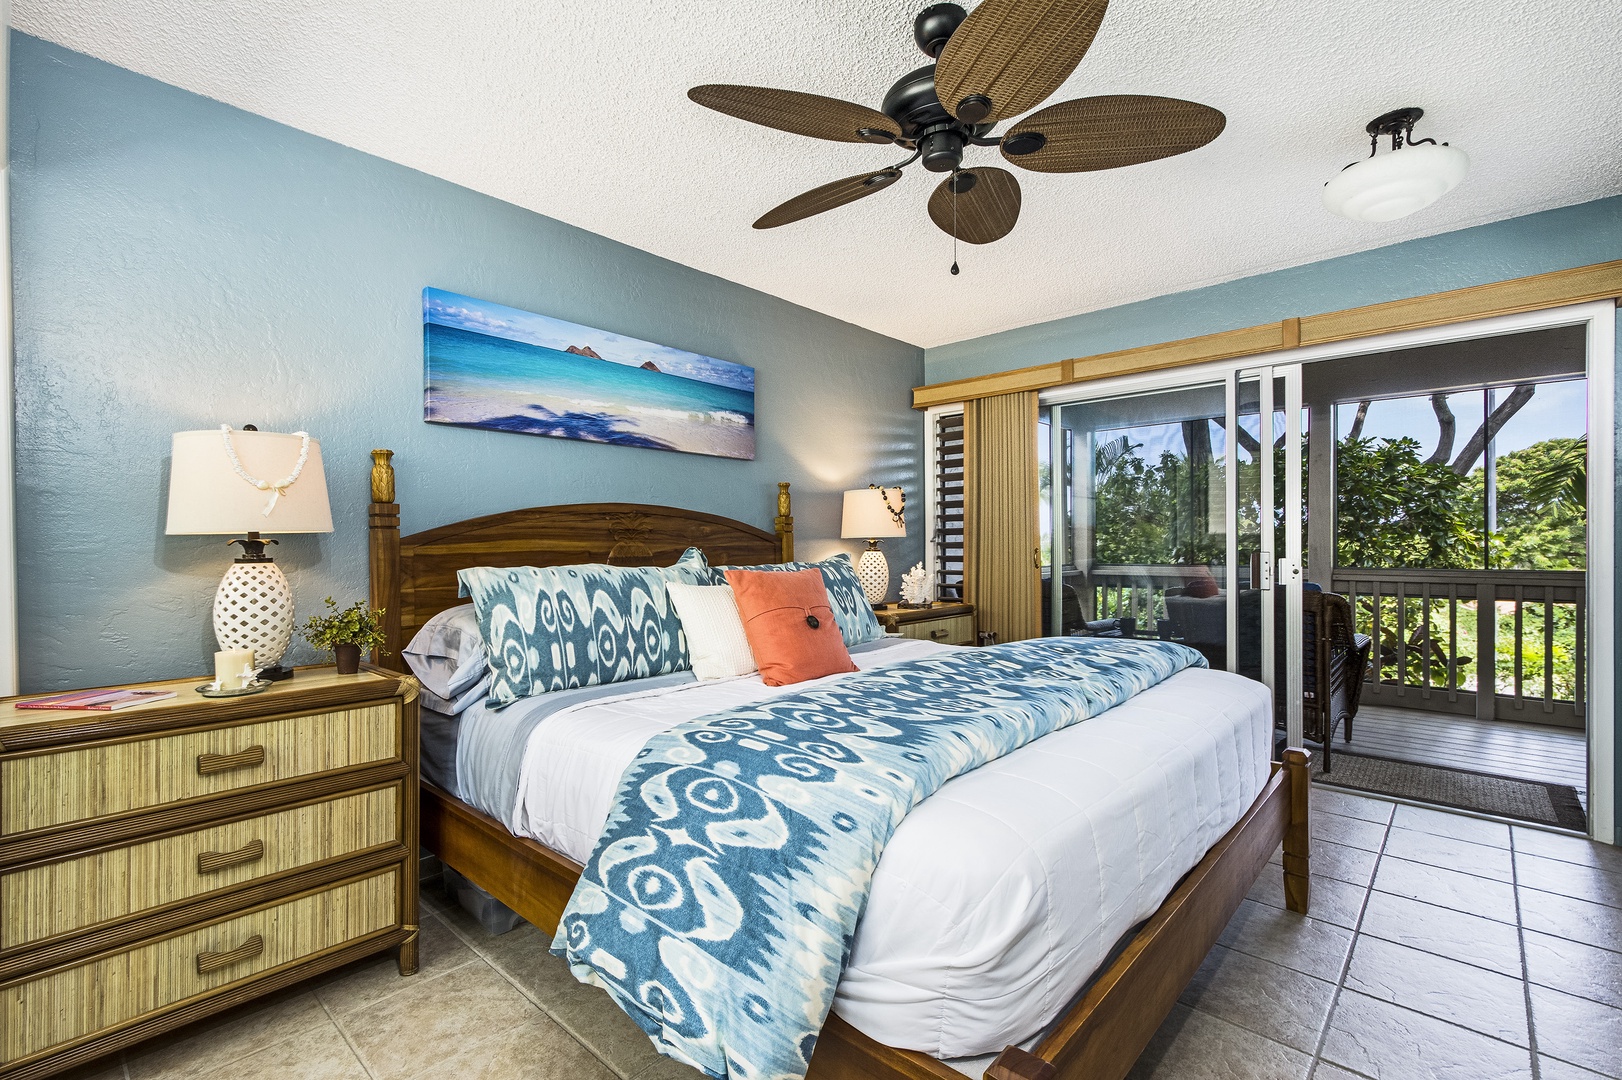 Kailua Kona Vacation Rentals, Keauhou Resort 104 - Primary bedroom equipped with King Bed